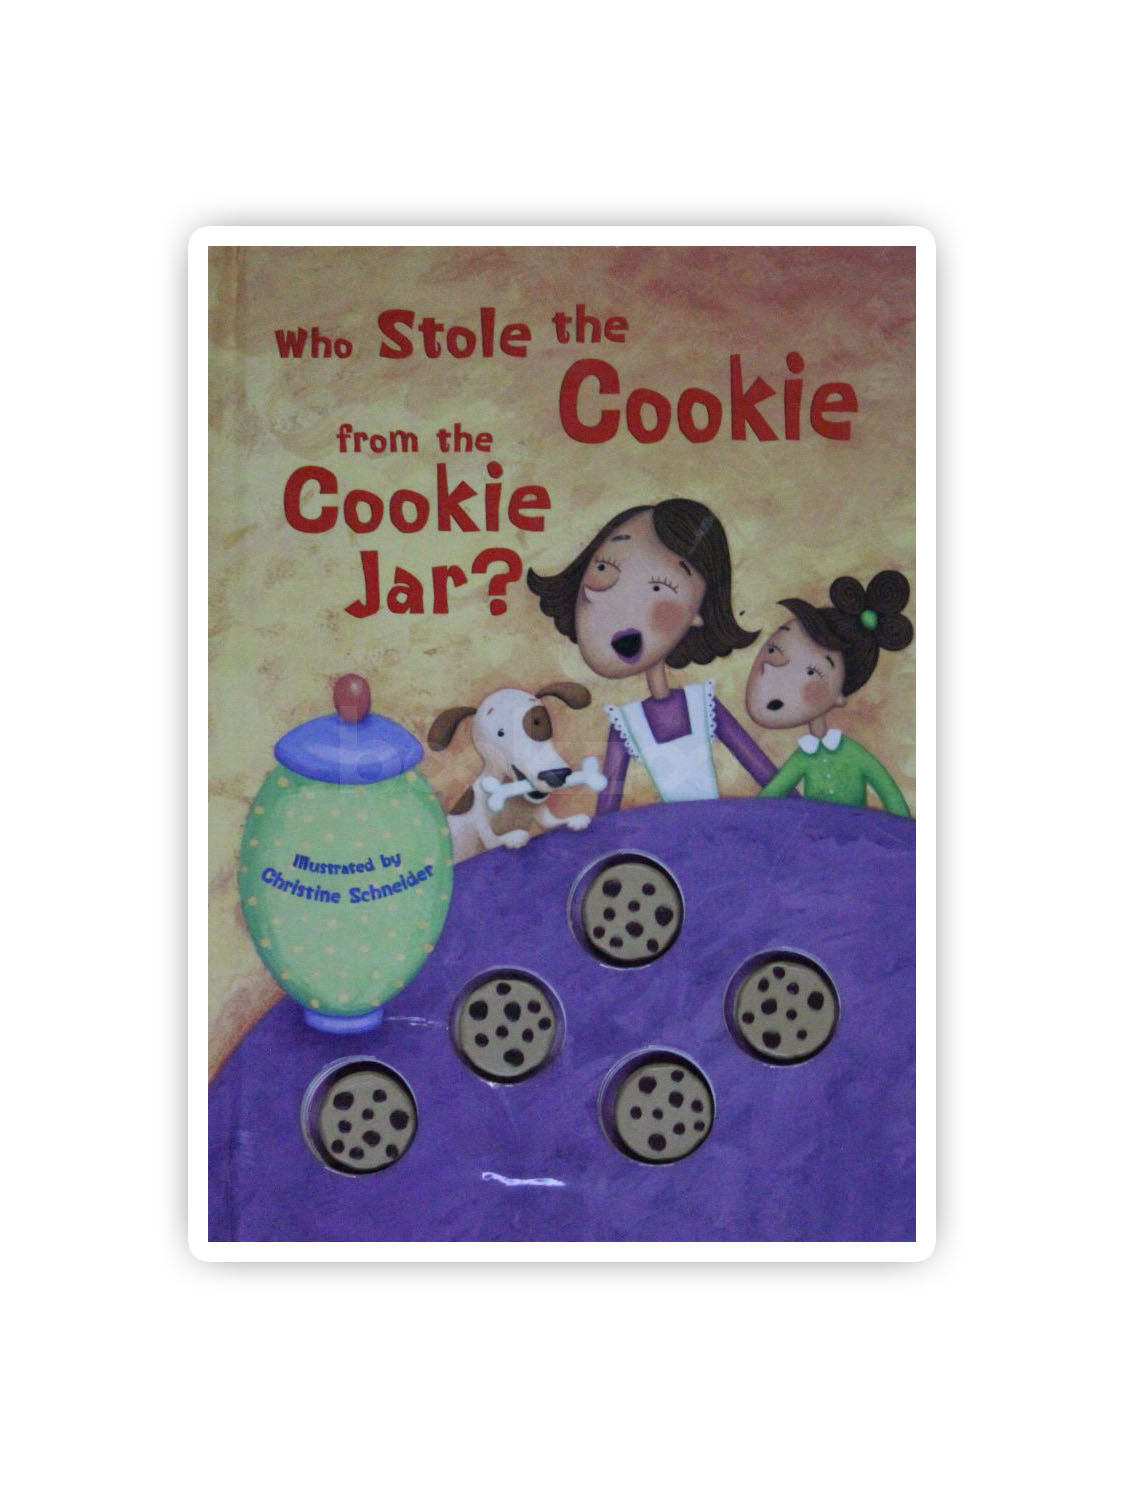 who stole the cookie from the cookie jar book